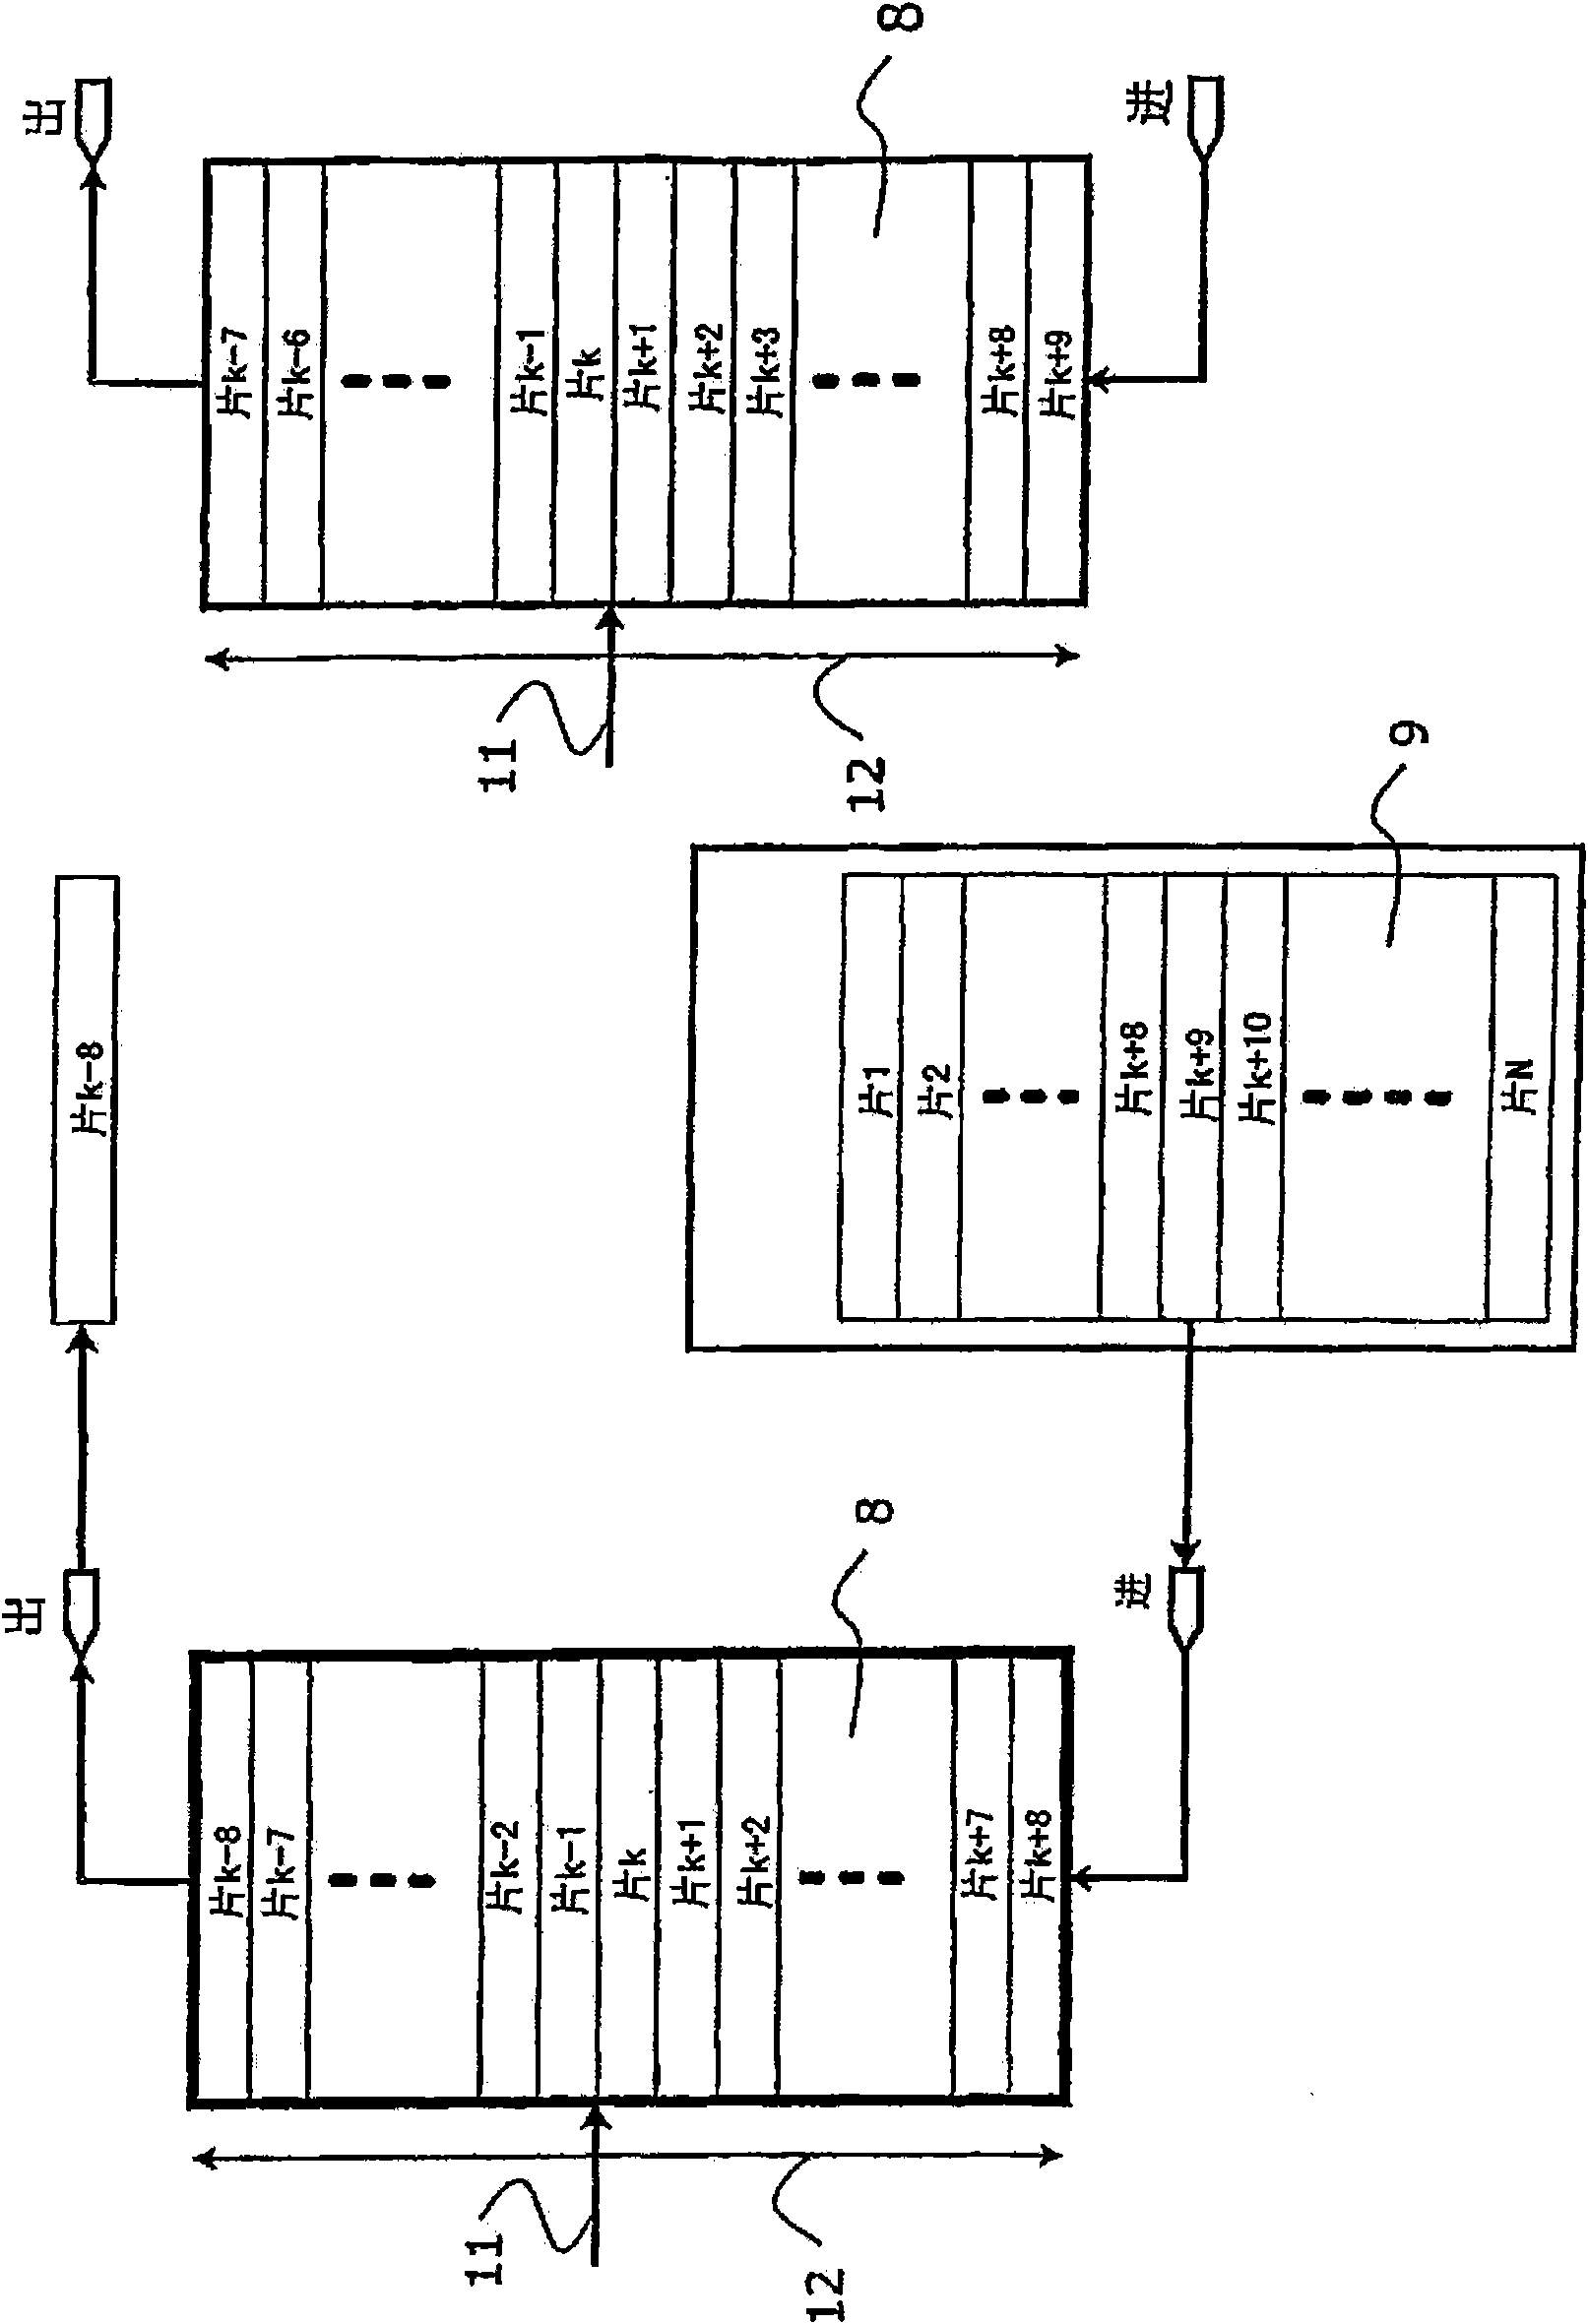 Video decoder with scalable compression and buffer for storing and retrieving reference frame data